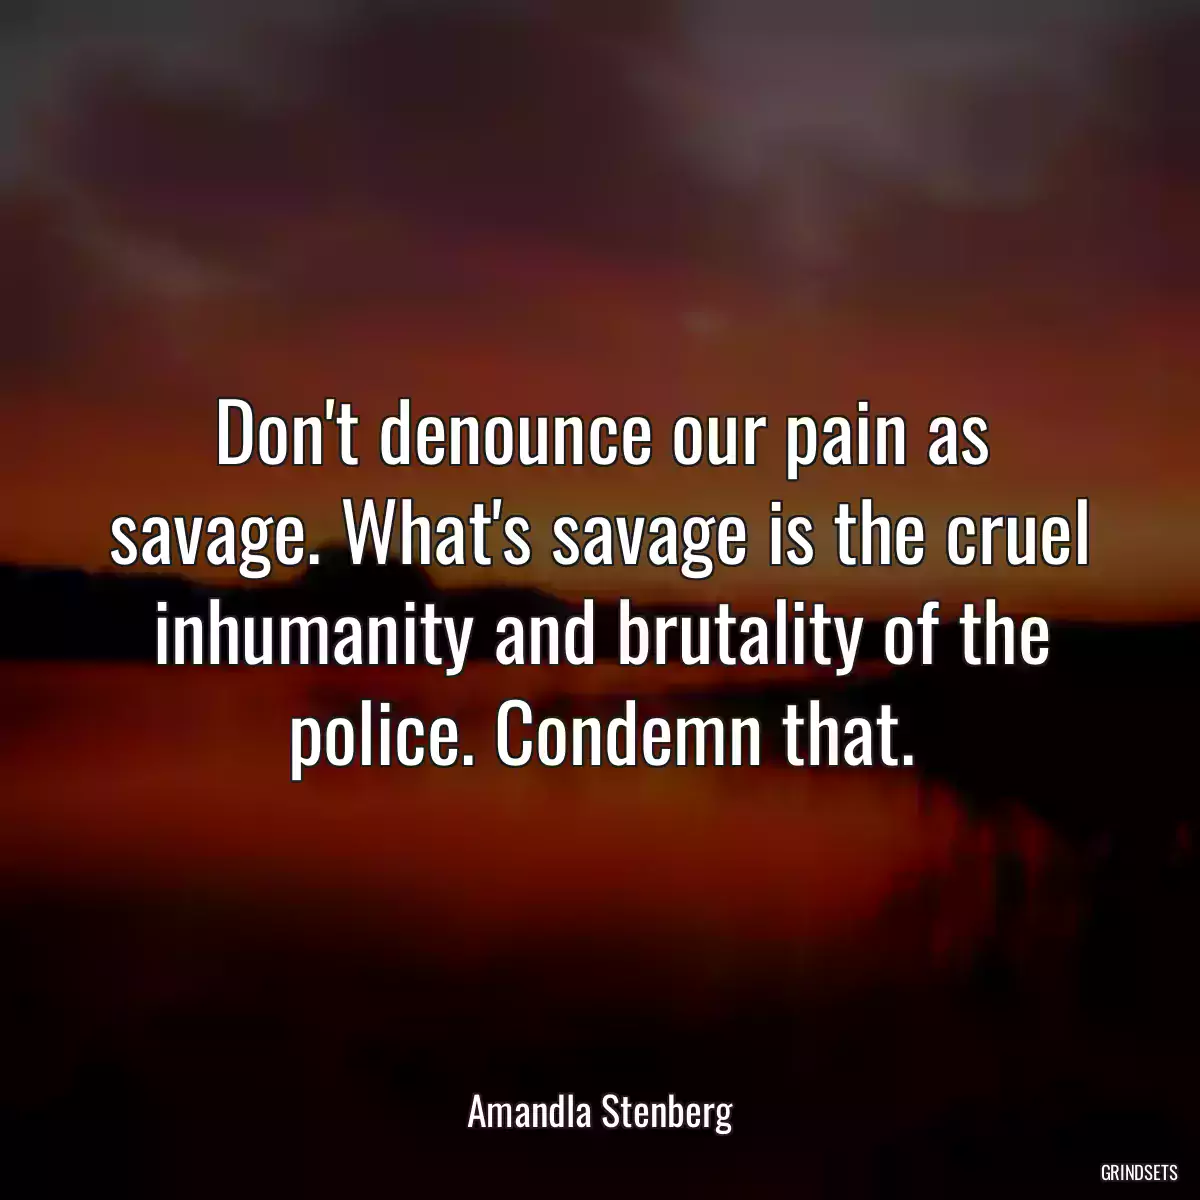 Don\'t denounce our pain as savage. What\'s savage is the cruel inhumanity and brutality of the police. Condemn that.